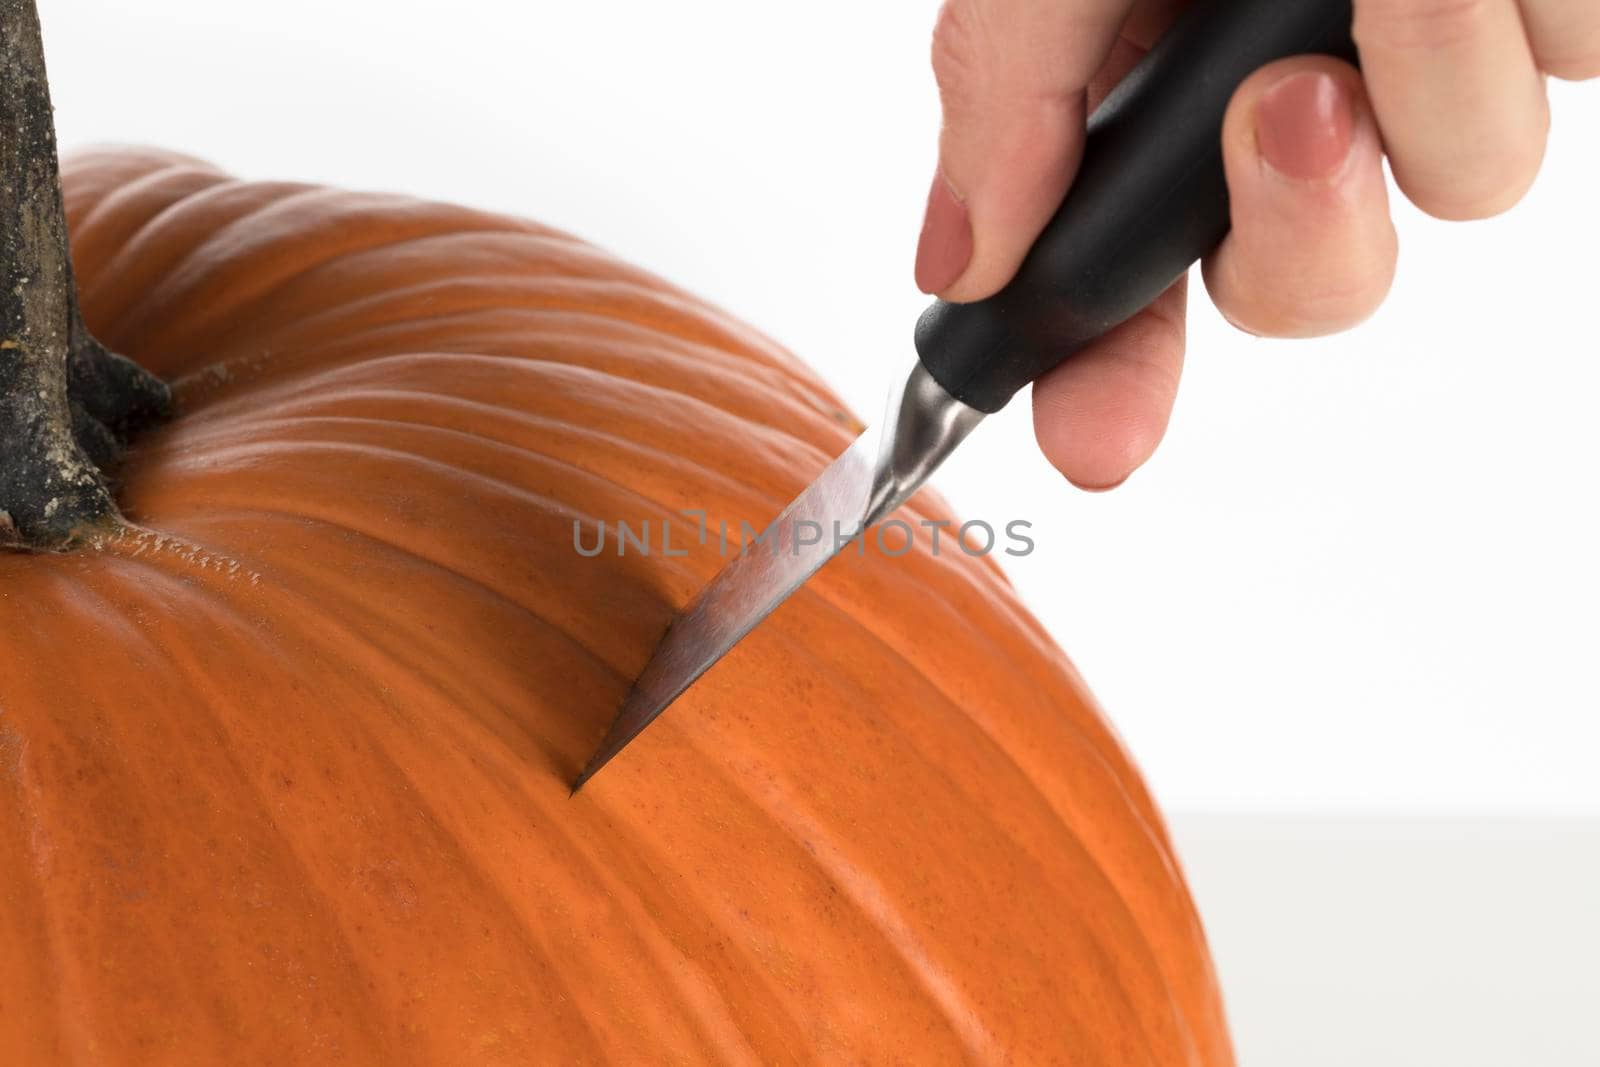 Close up of knife cutting into pumpkin for carving into jack o lantern